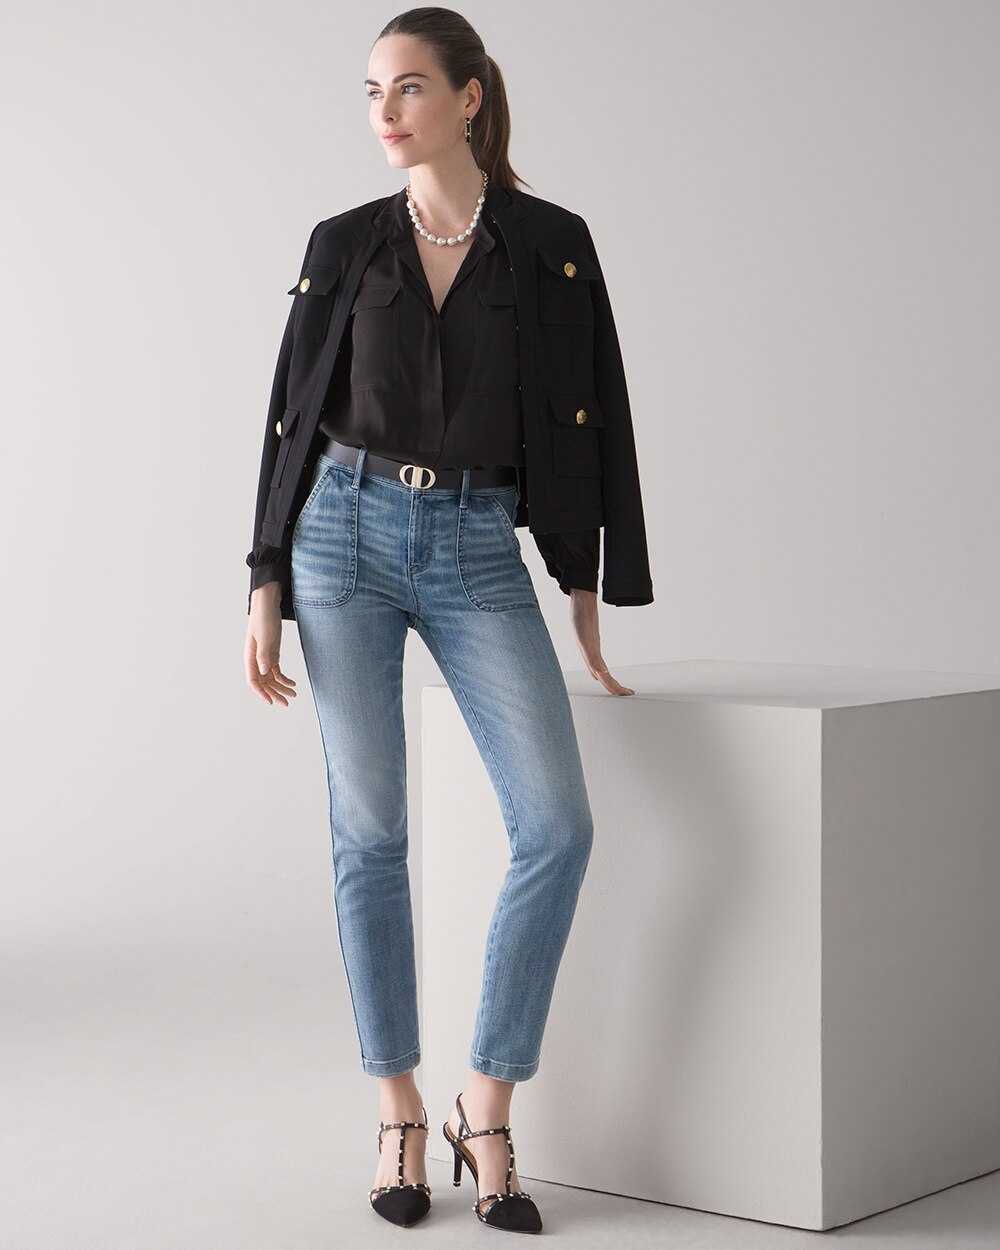 High-Rise Everyday Soft Denim\u2122 Patch Pocket Straight Crop Jeans video preview image, click to start video